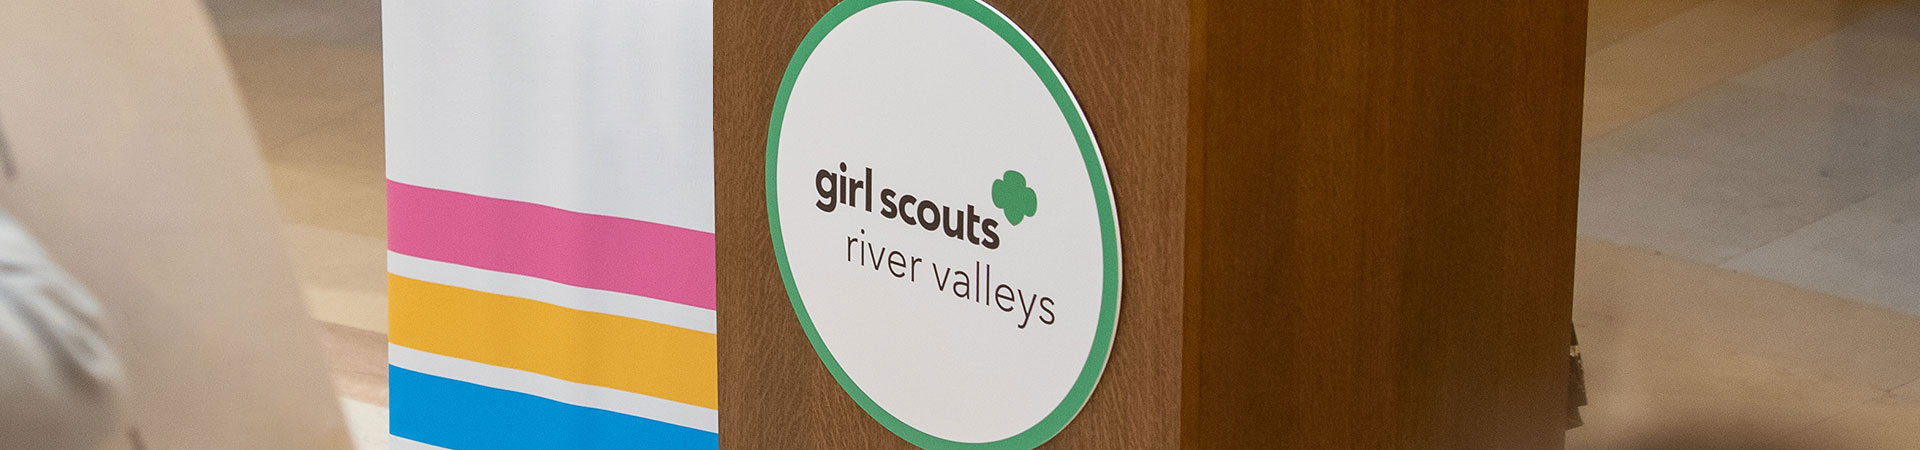  speaker podium with a Girls Scouts River Valleys sign 